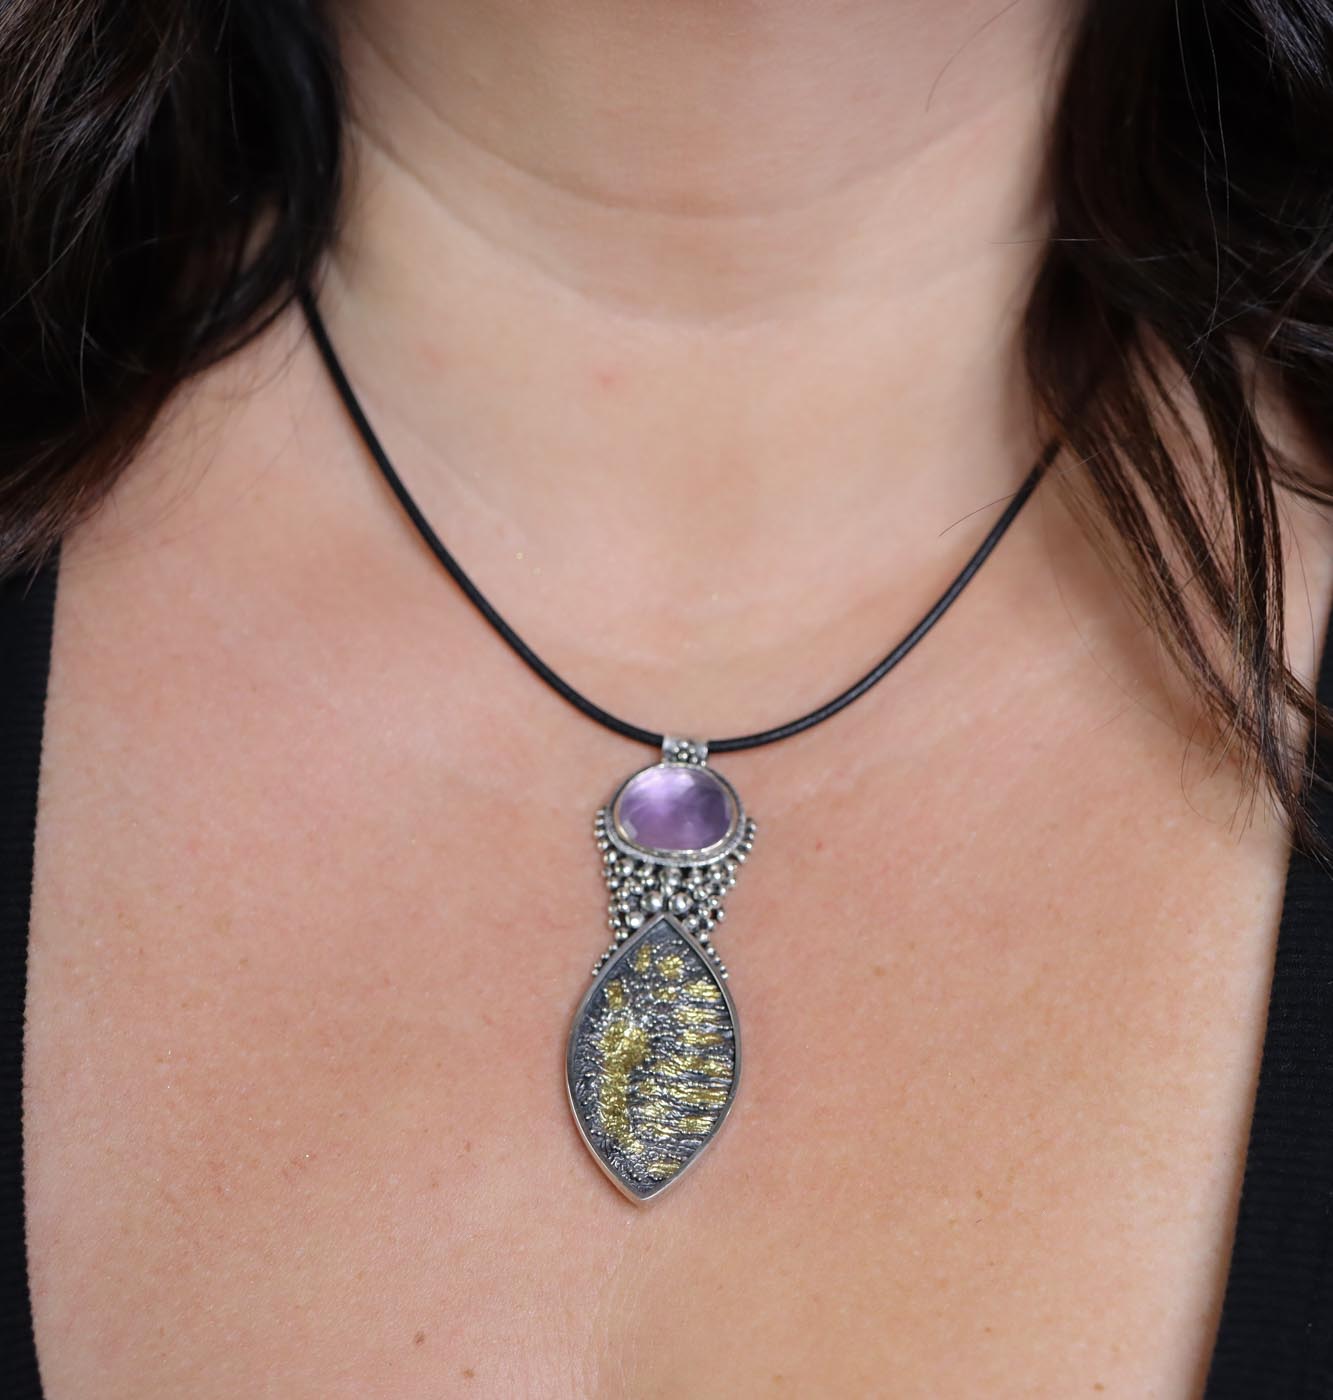 The Goddess Pendant #3 Amethyst Necklace Sterling Silver and 22k Gold